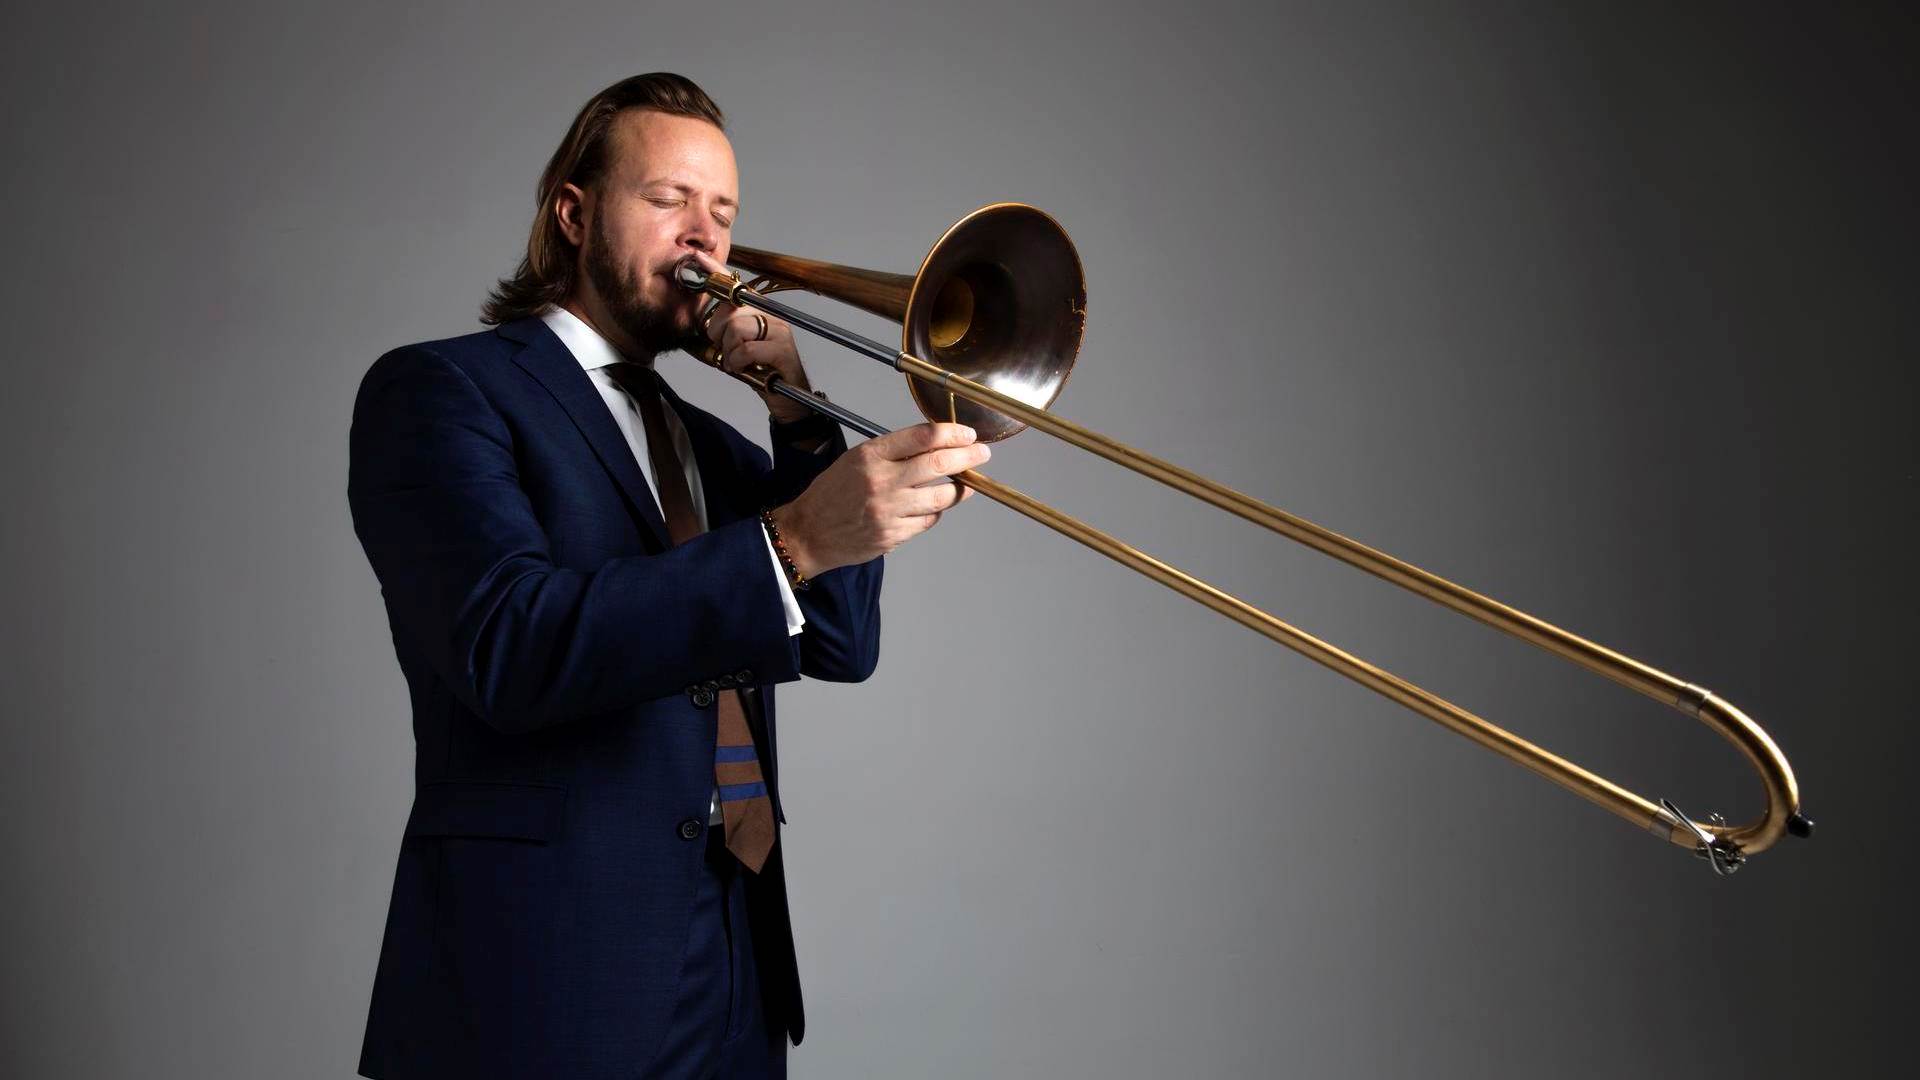 A white man with long blond hair and a blue suit playing trombone against a grey background.